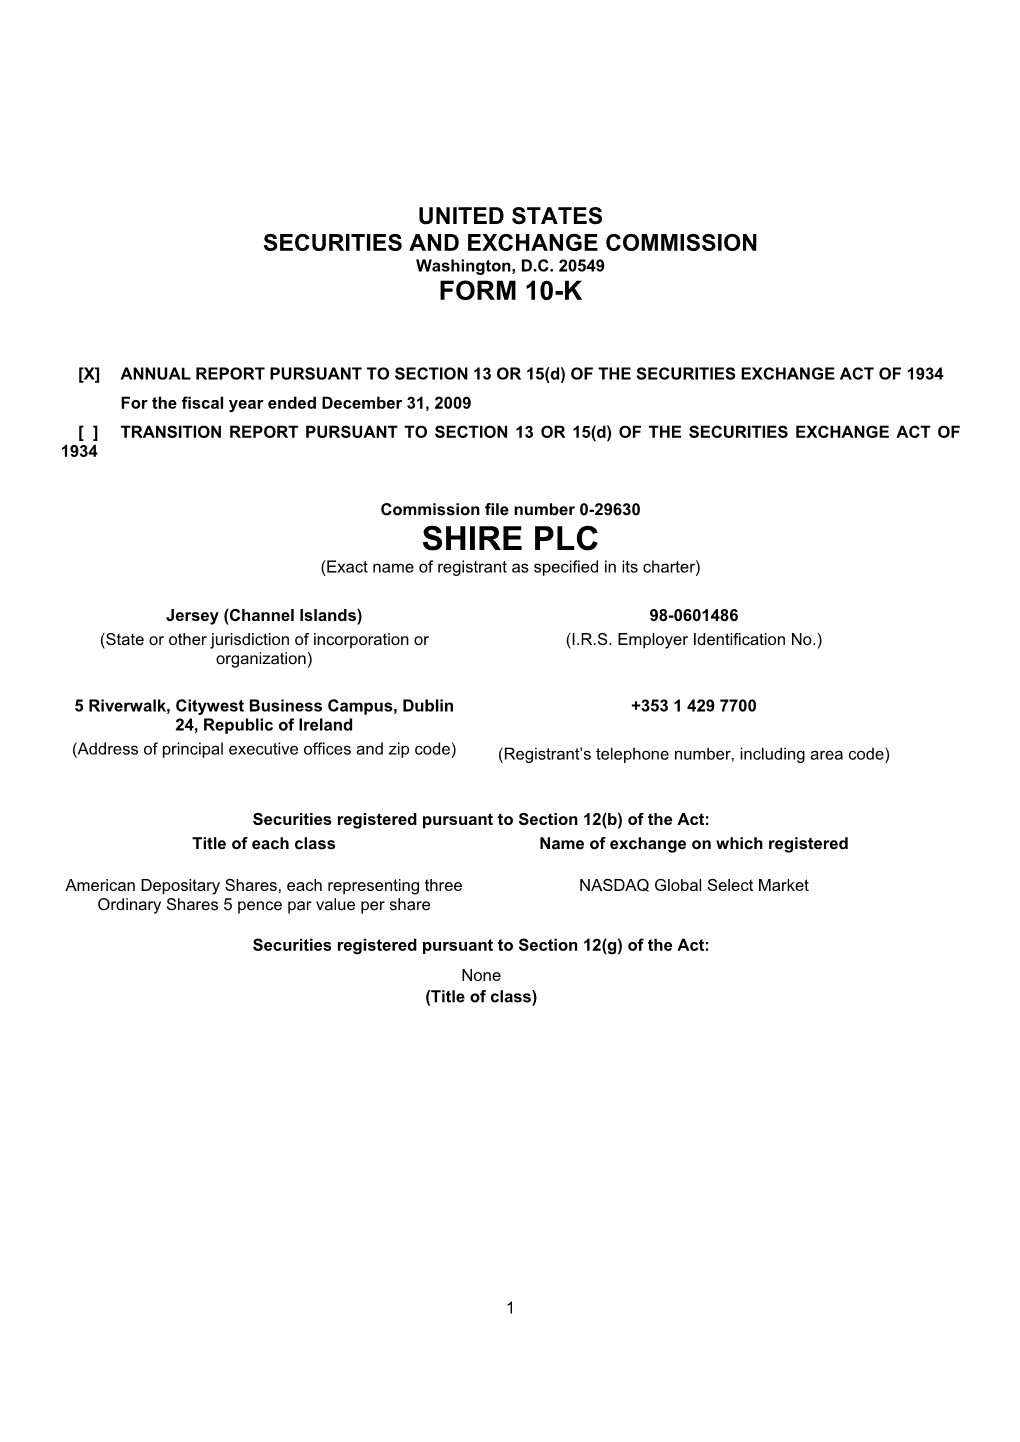 SHIRE PLC (Exact Name of Registrant As Specified in Its Charter)